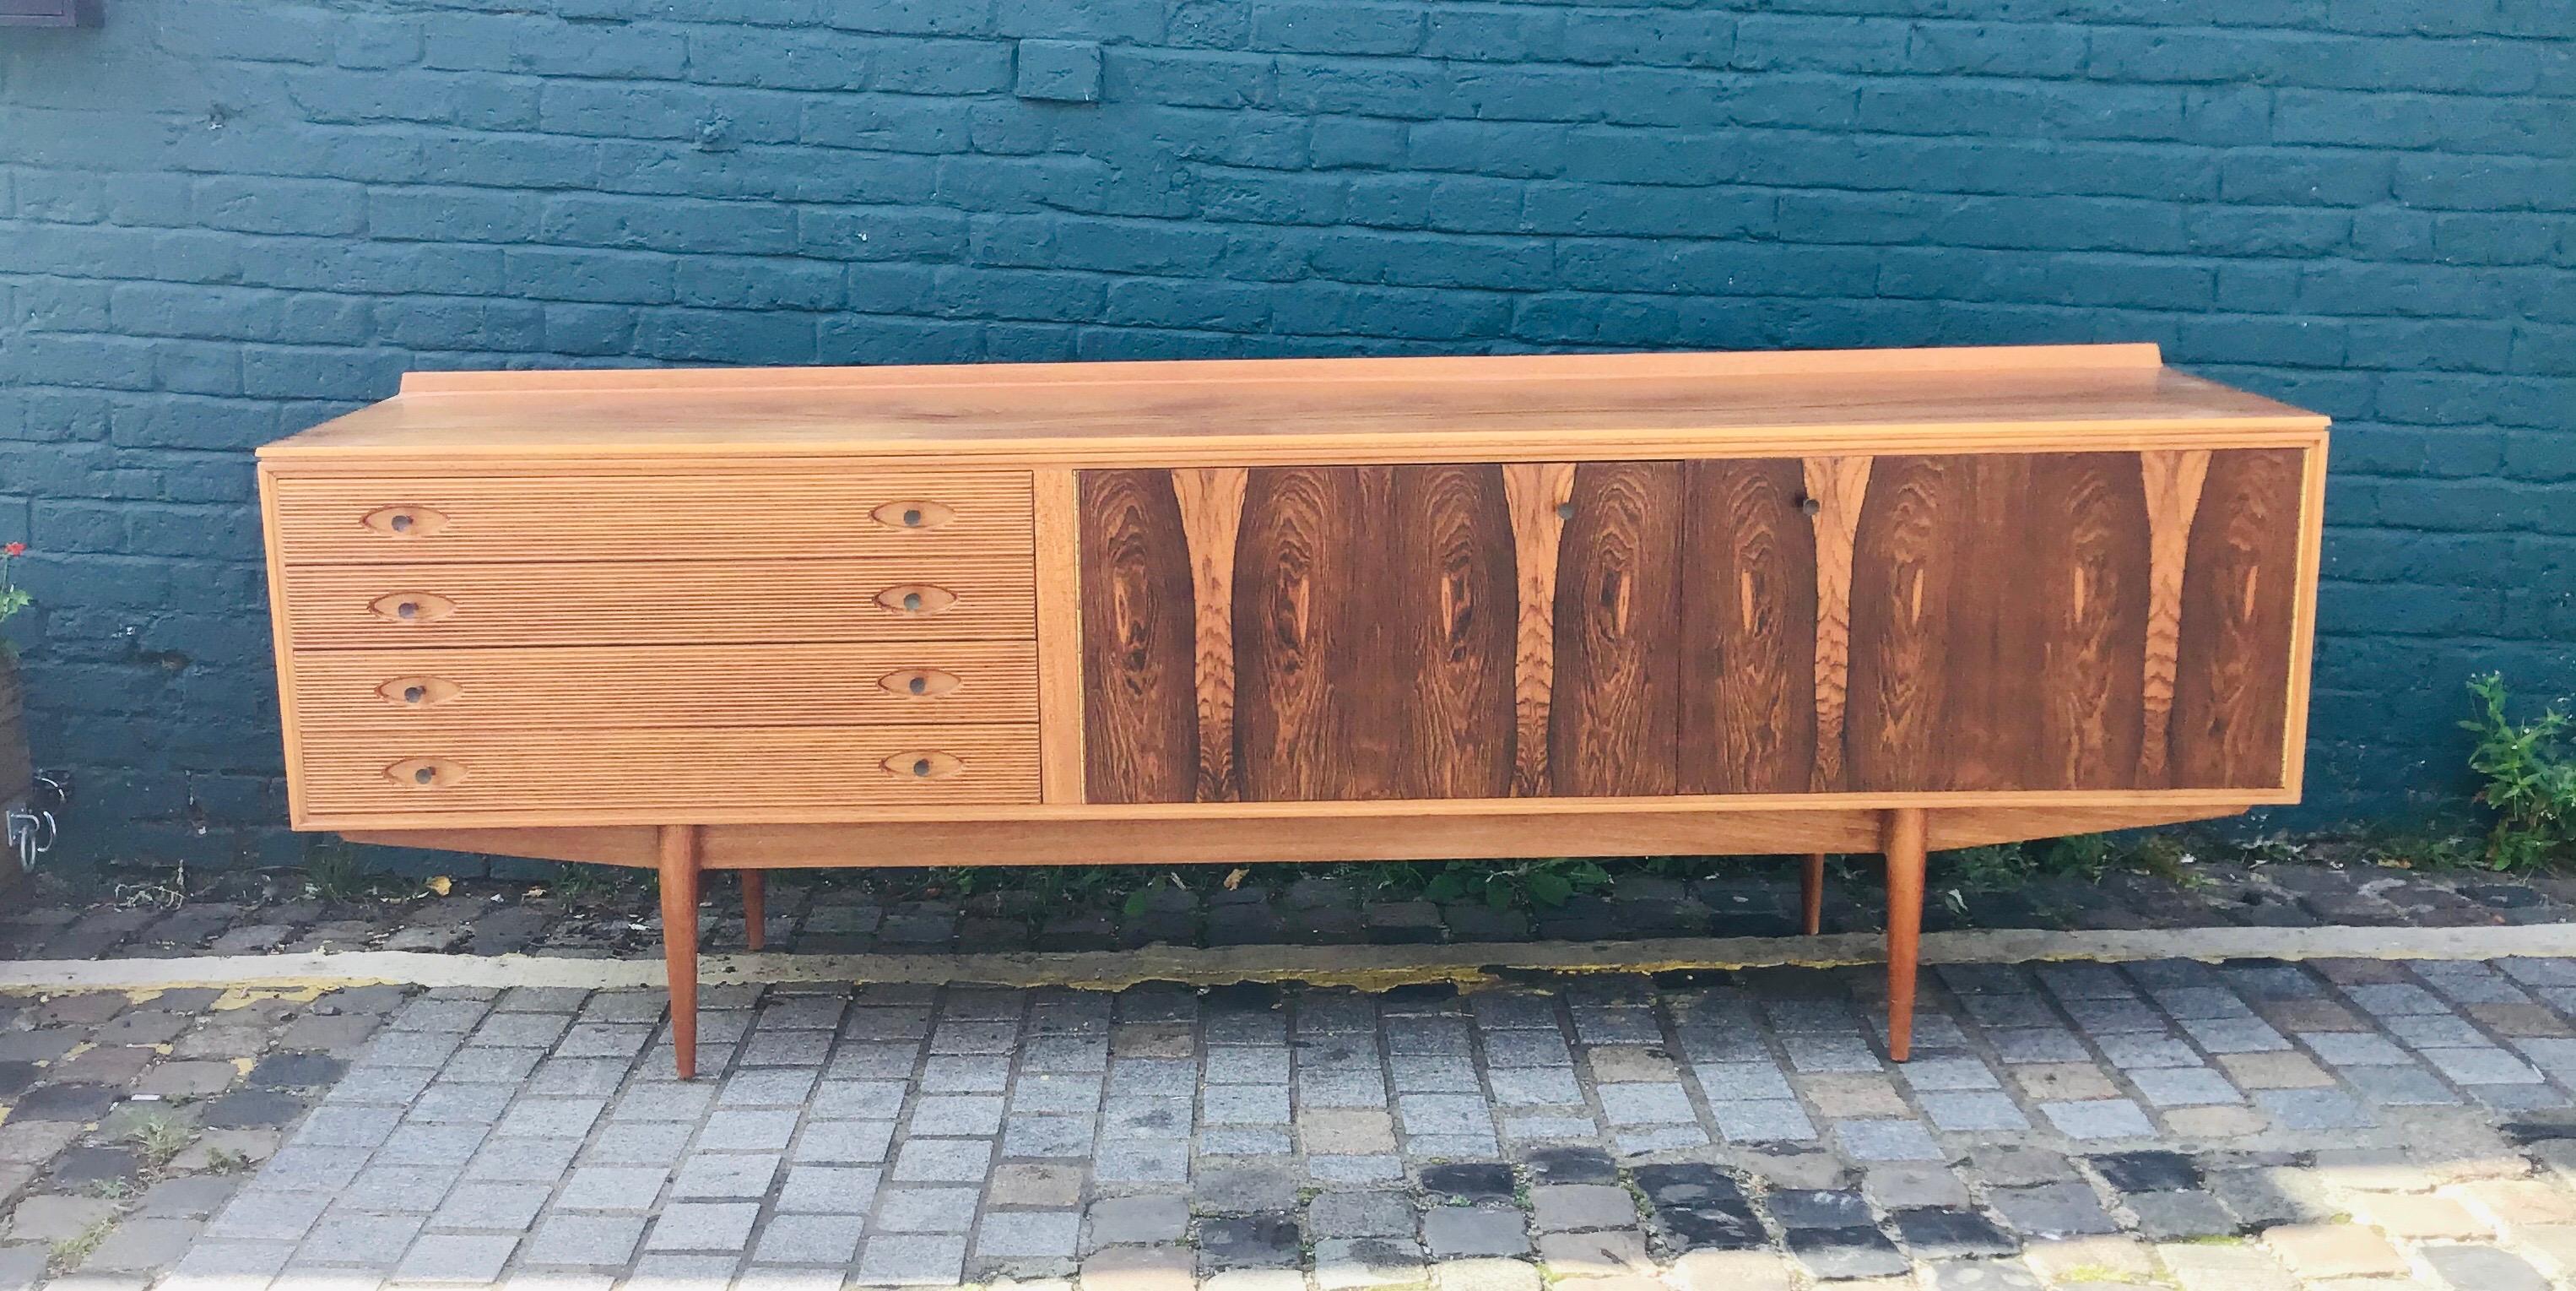 Stunning rosewood grain pattern to doors and top, and reeded solid teak drawer fronts with turned brass handles.

- Elegant styling, a statement piece.

Robert Heritage is synonymous with great British design. The Hamilton sideboard, an award